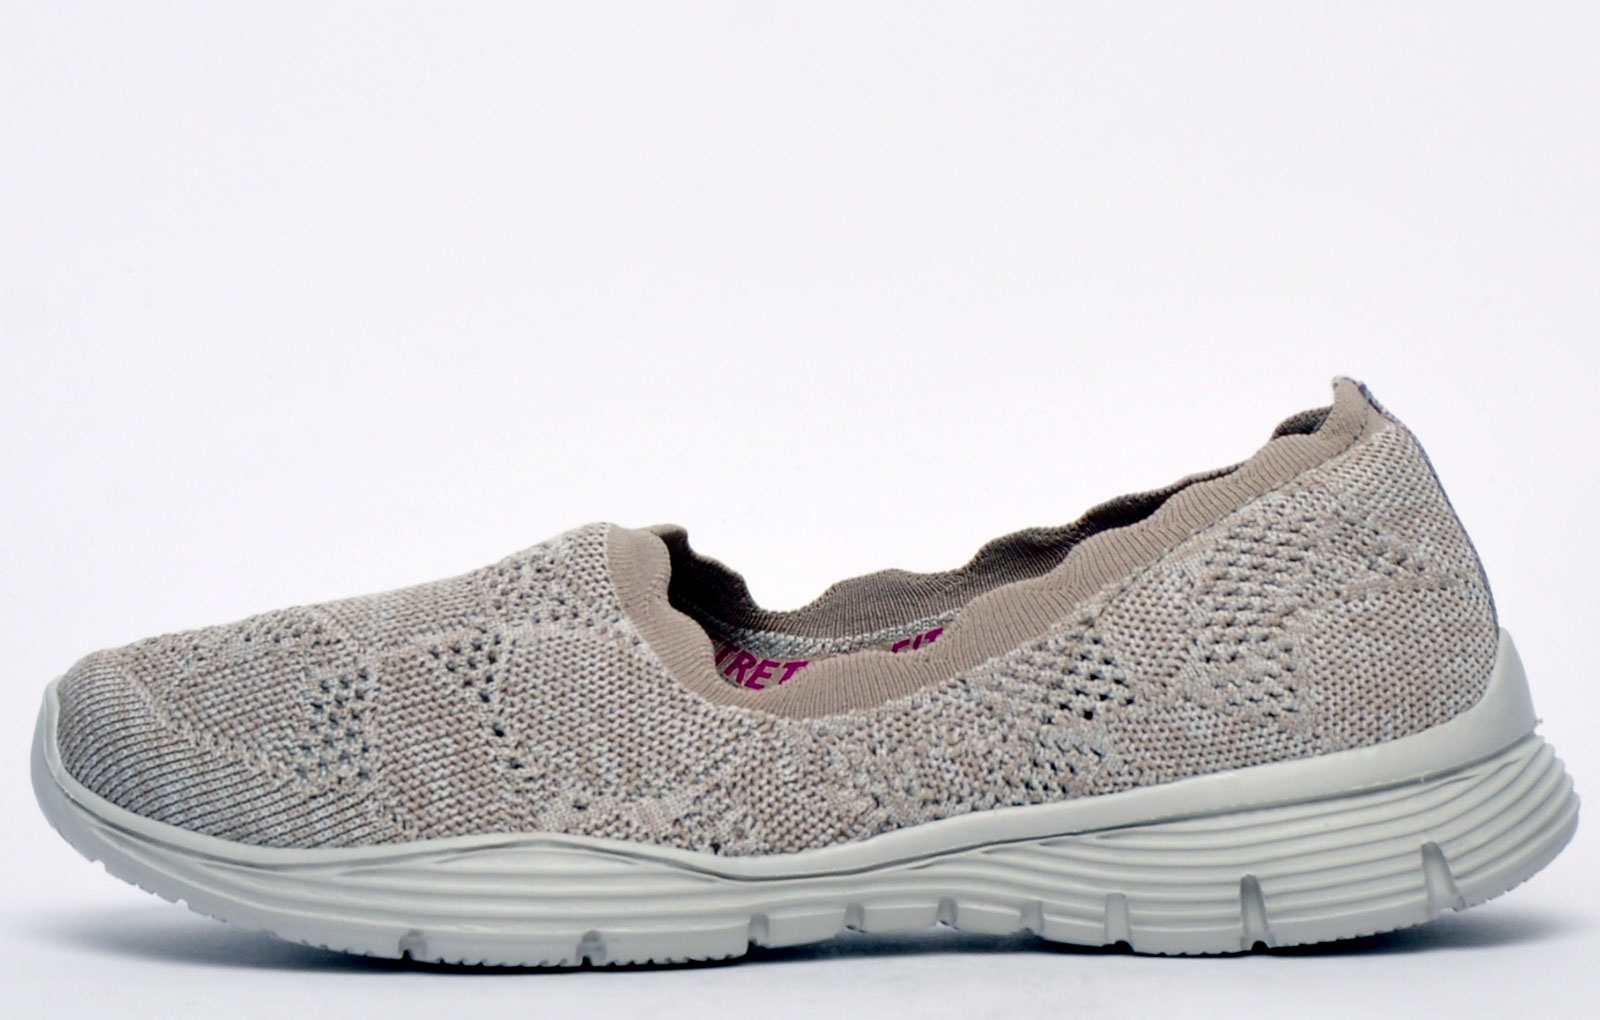 Cheap Skechers Shoes for Women UK – Free UK Delivery | Express Trainers